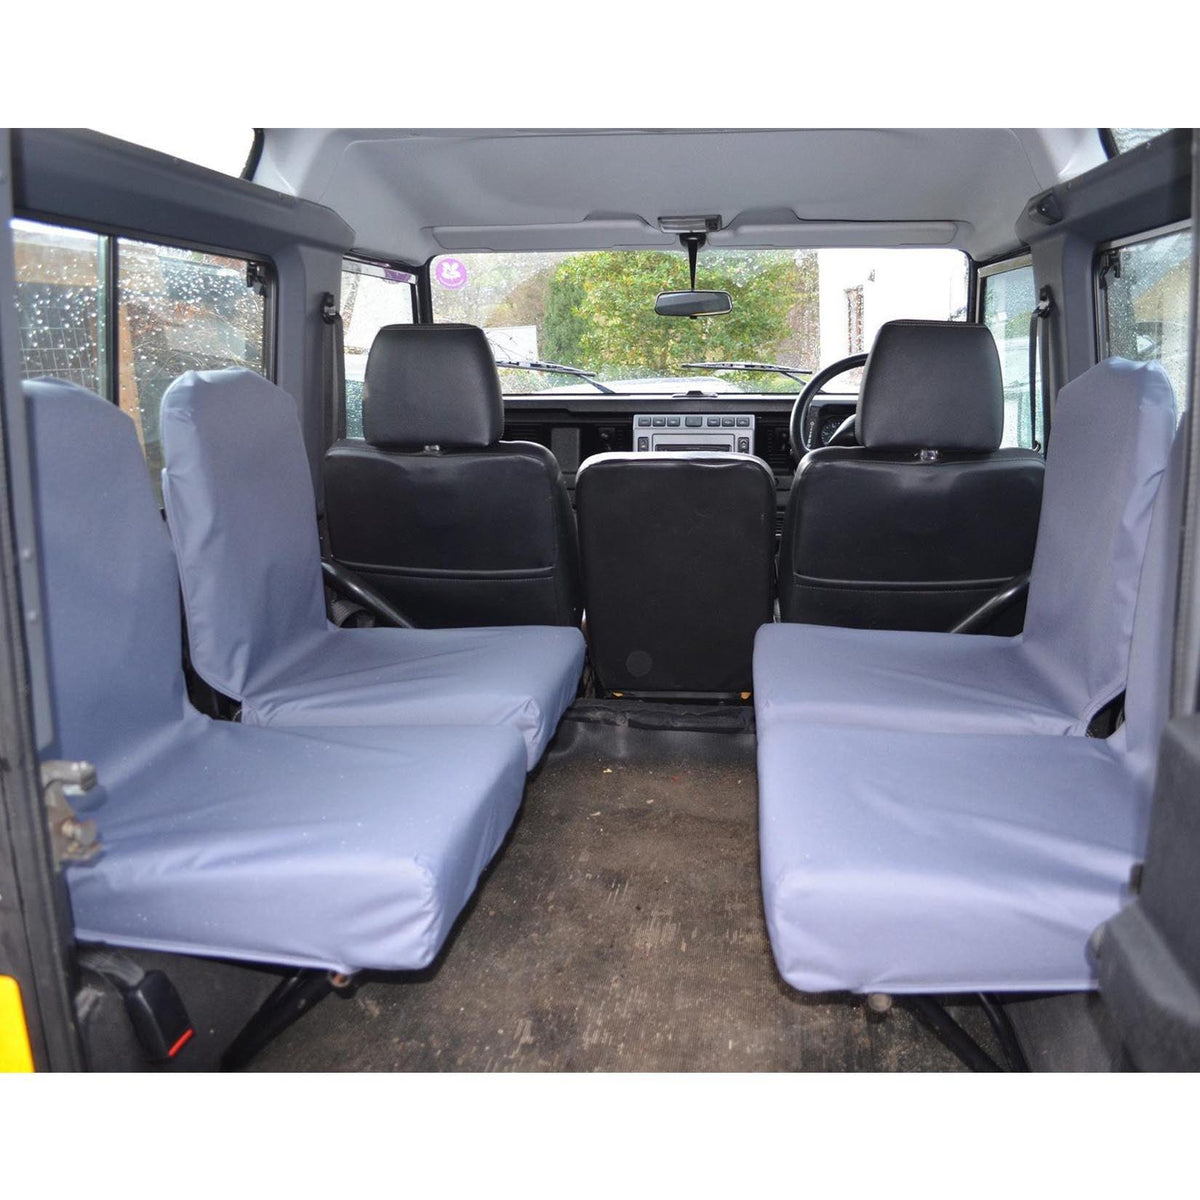 LAND ROVER DEFENDER 90 110 - 1983-2007 REAR SET OF 4 DICKY FOLDING SEAT COVERS - GREY - Storm Xccessories2